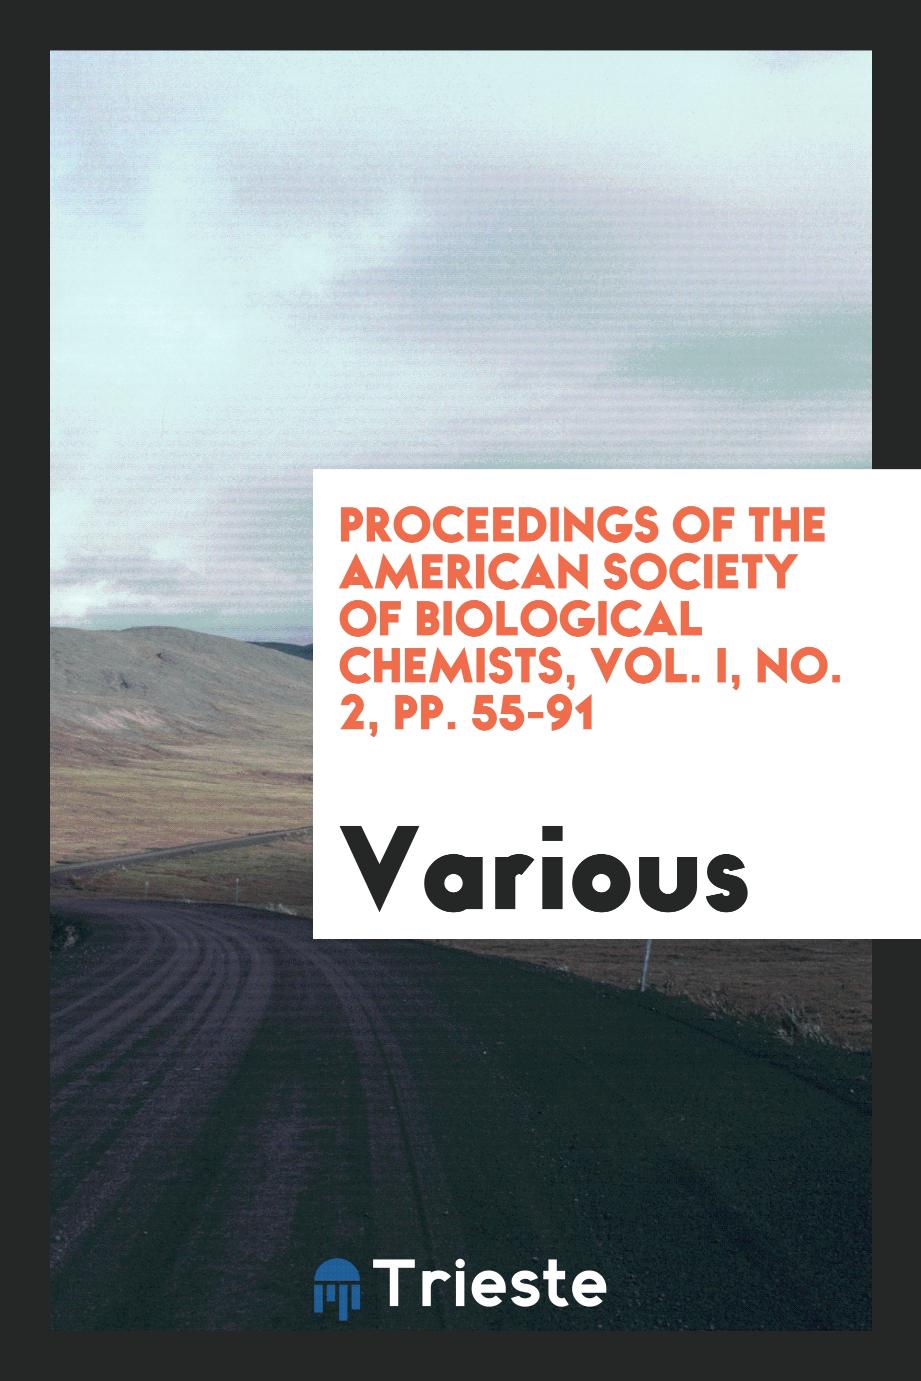 Proceedings of the American Society of Biological Chemists, Vol. I, No. 2, pp. 55-91